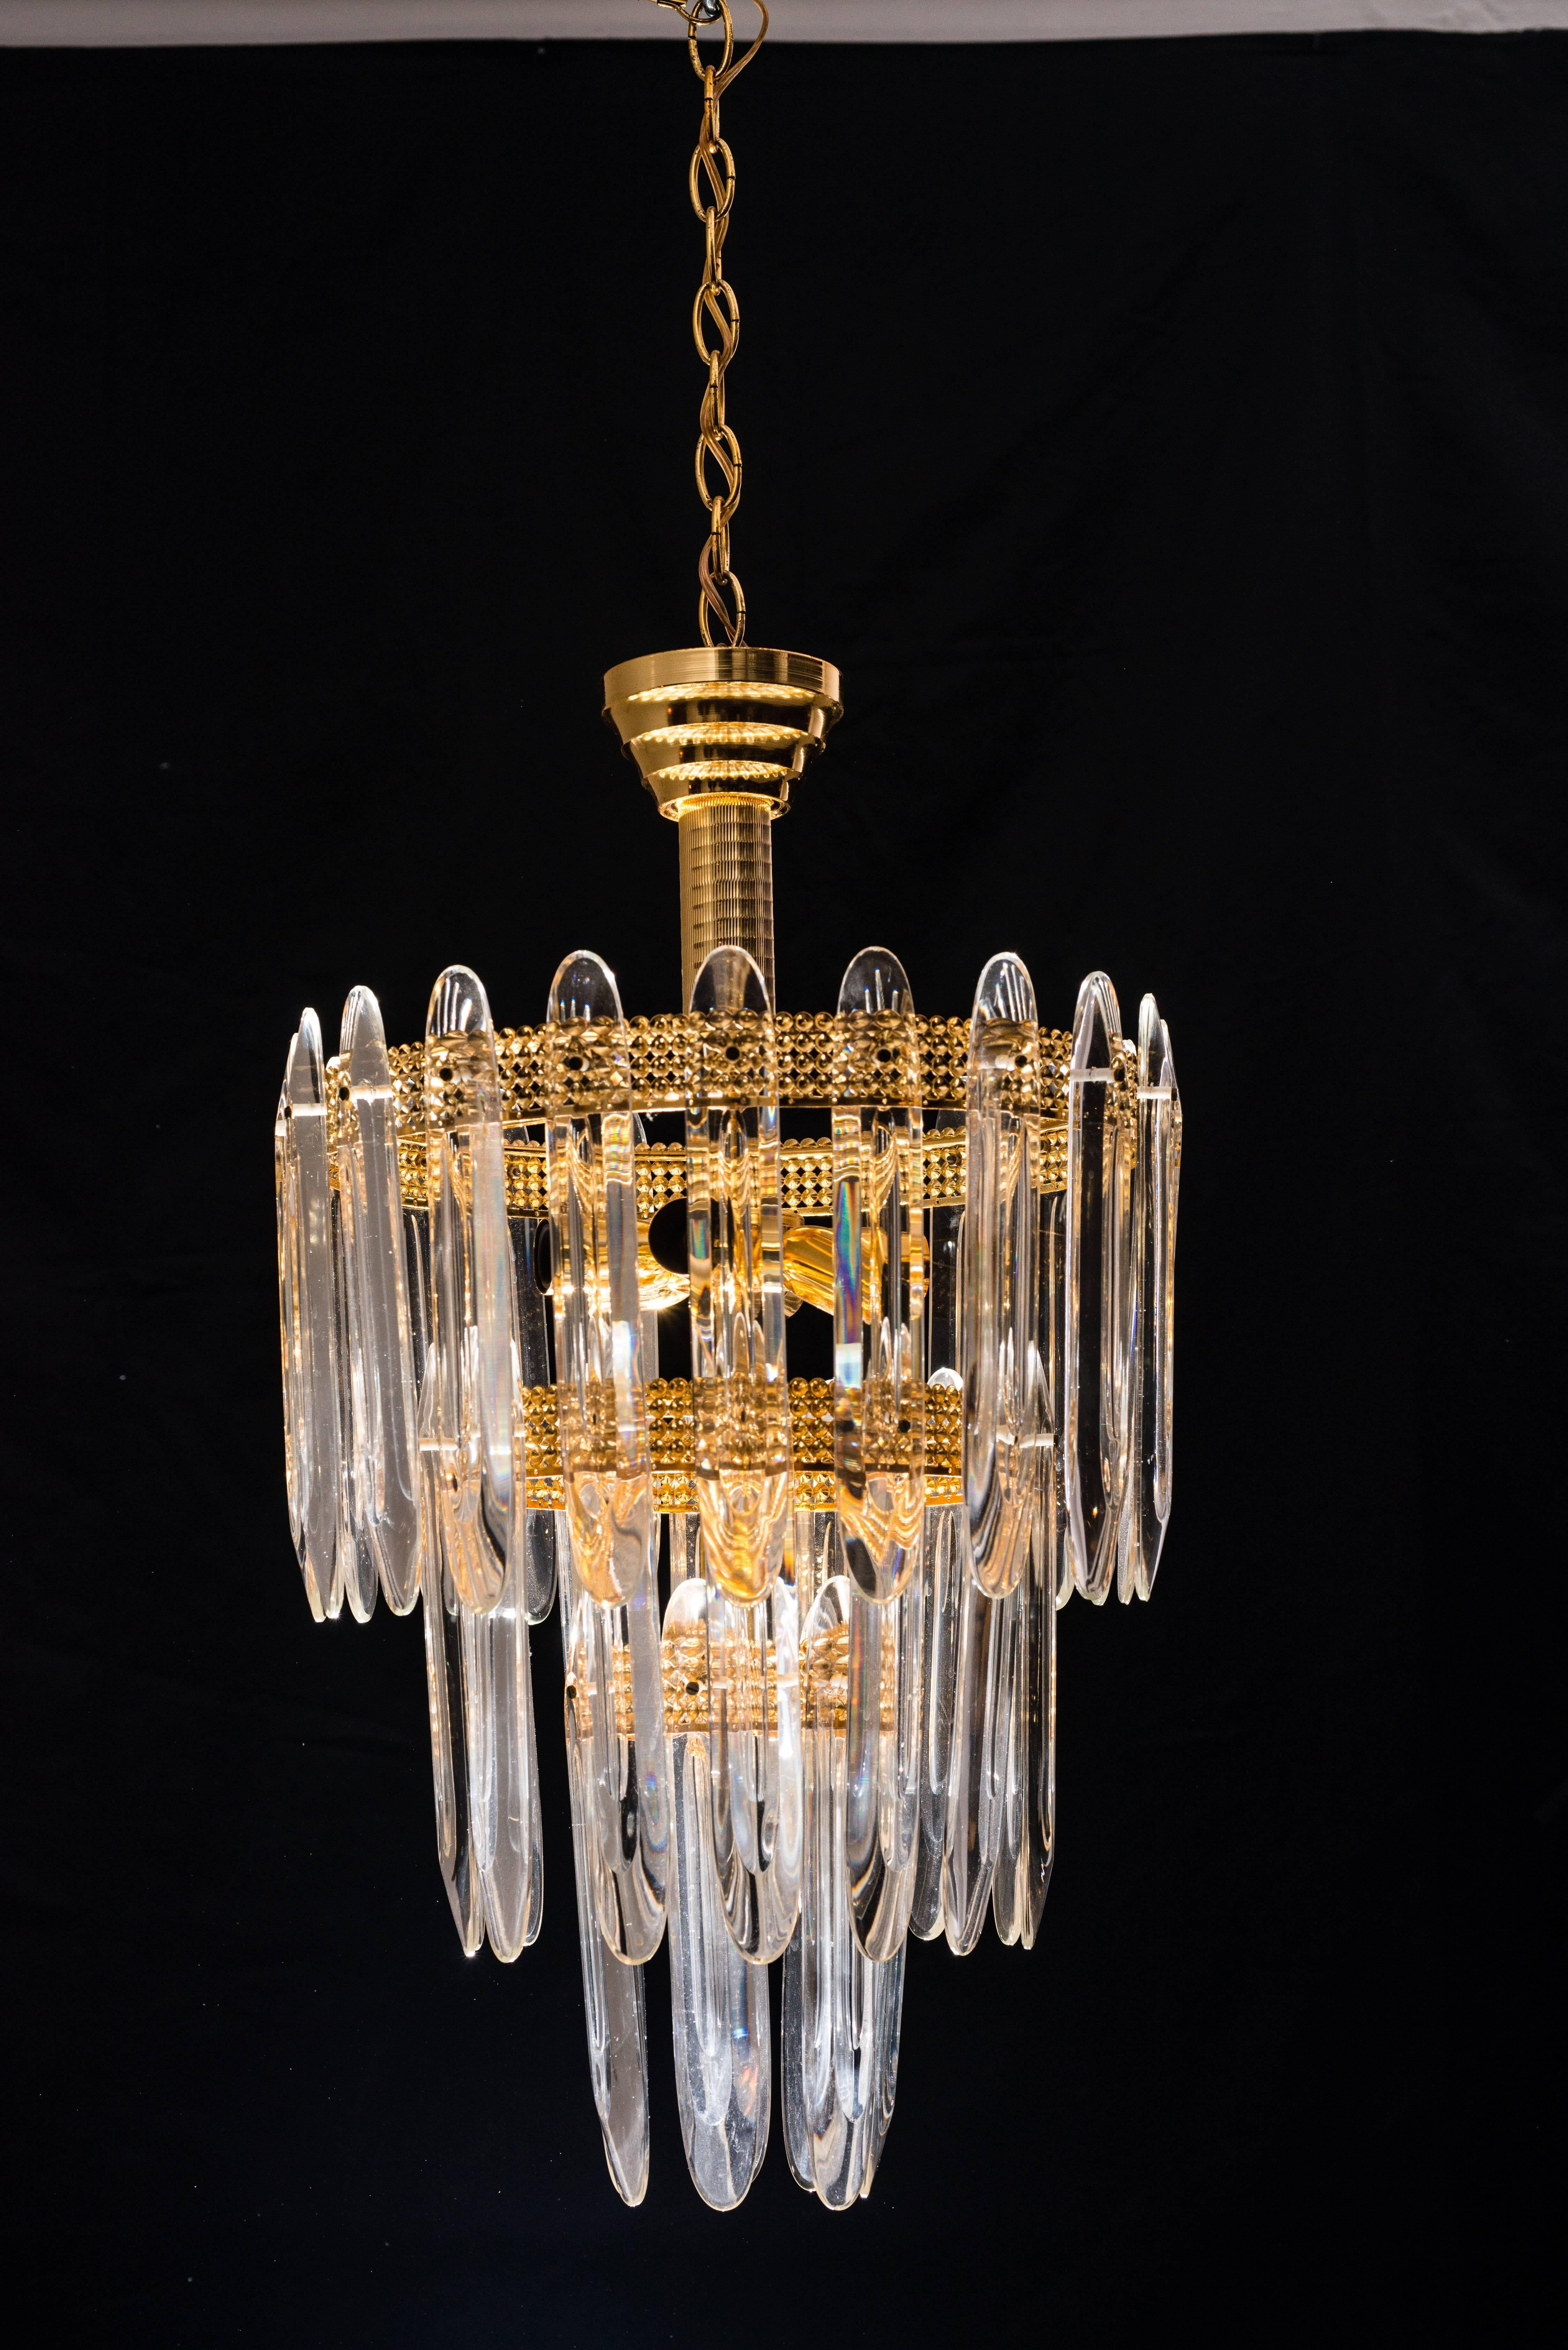 Three-tier shaped crystals on brass-plated frame. Three-tier, 13 lights.